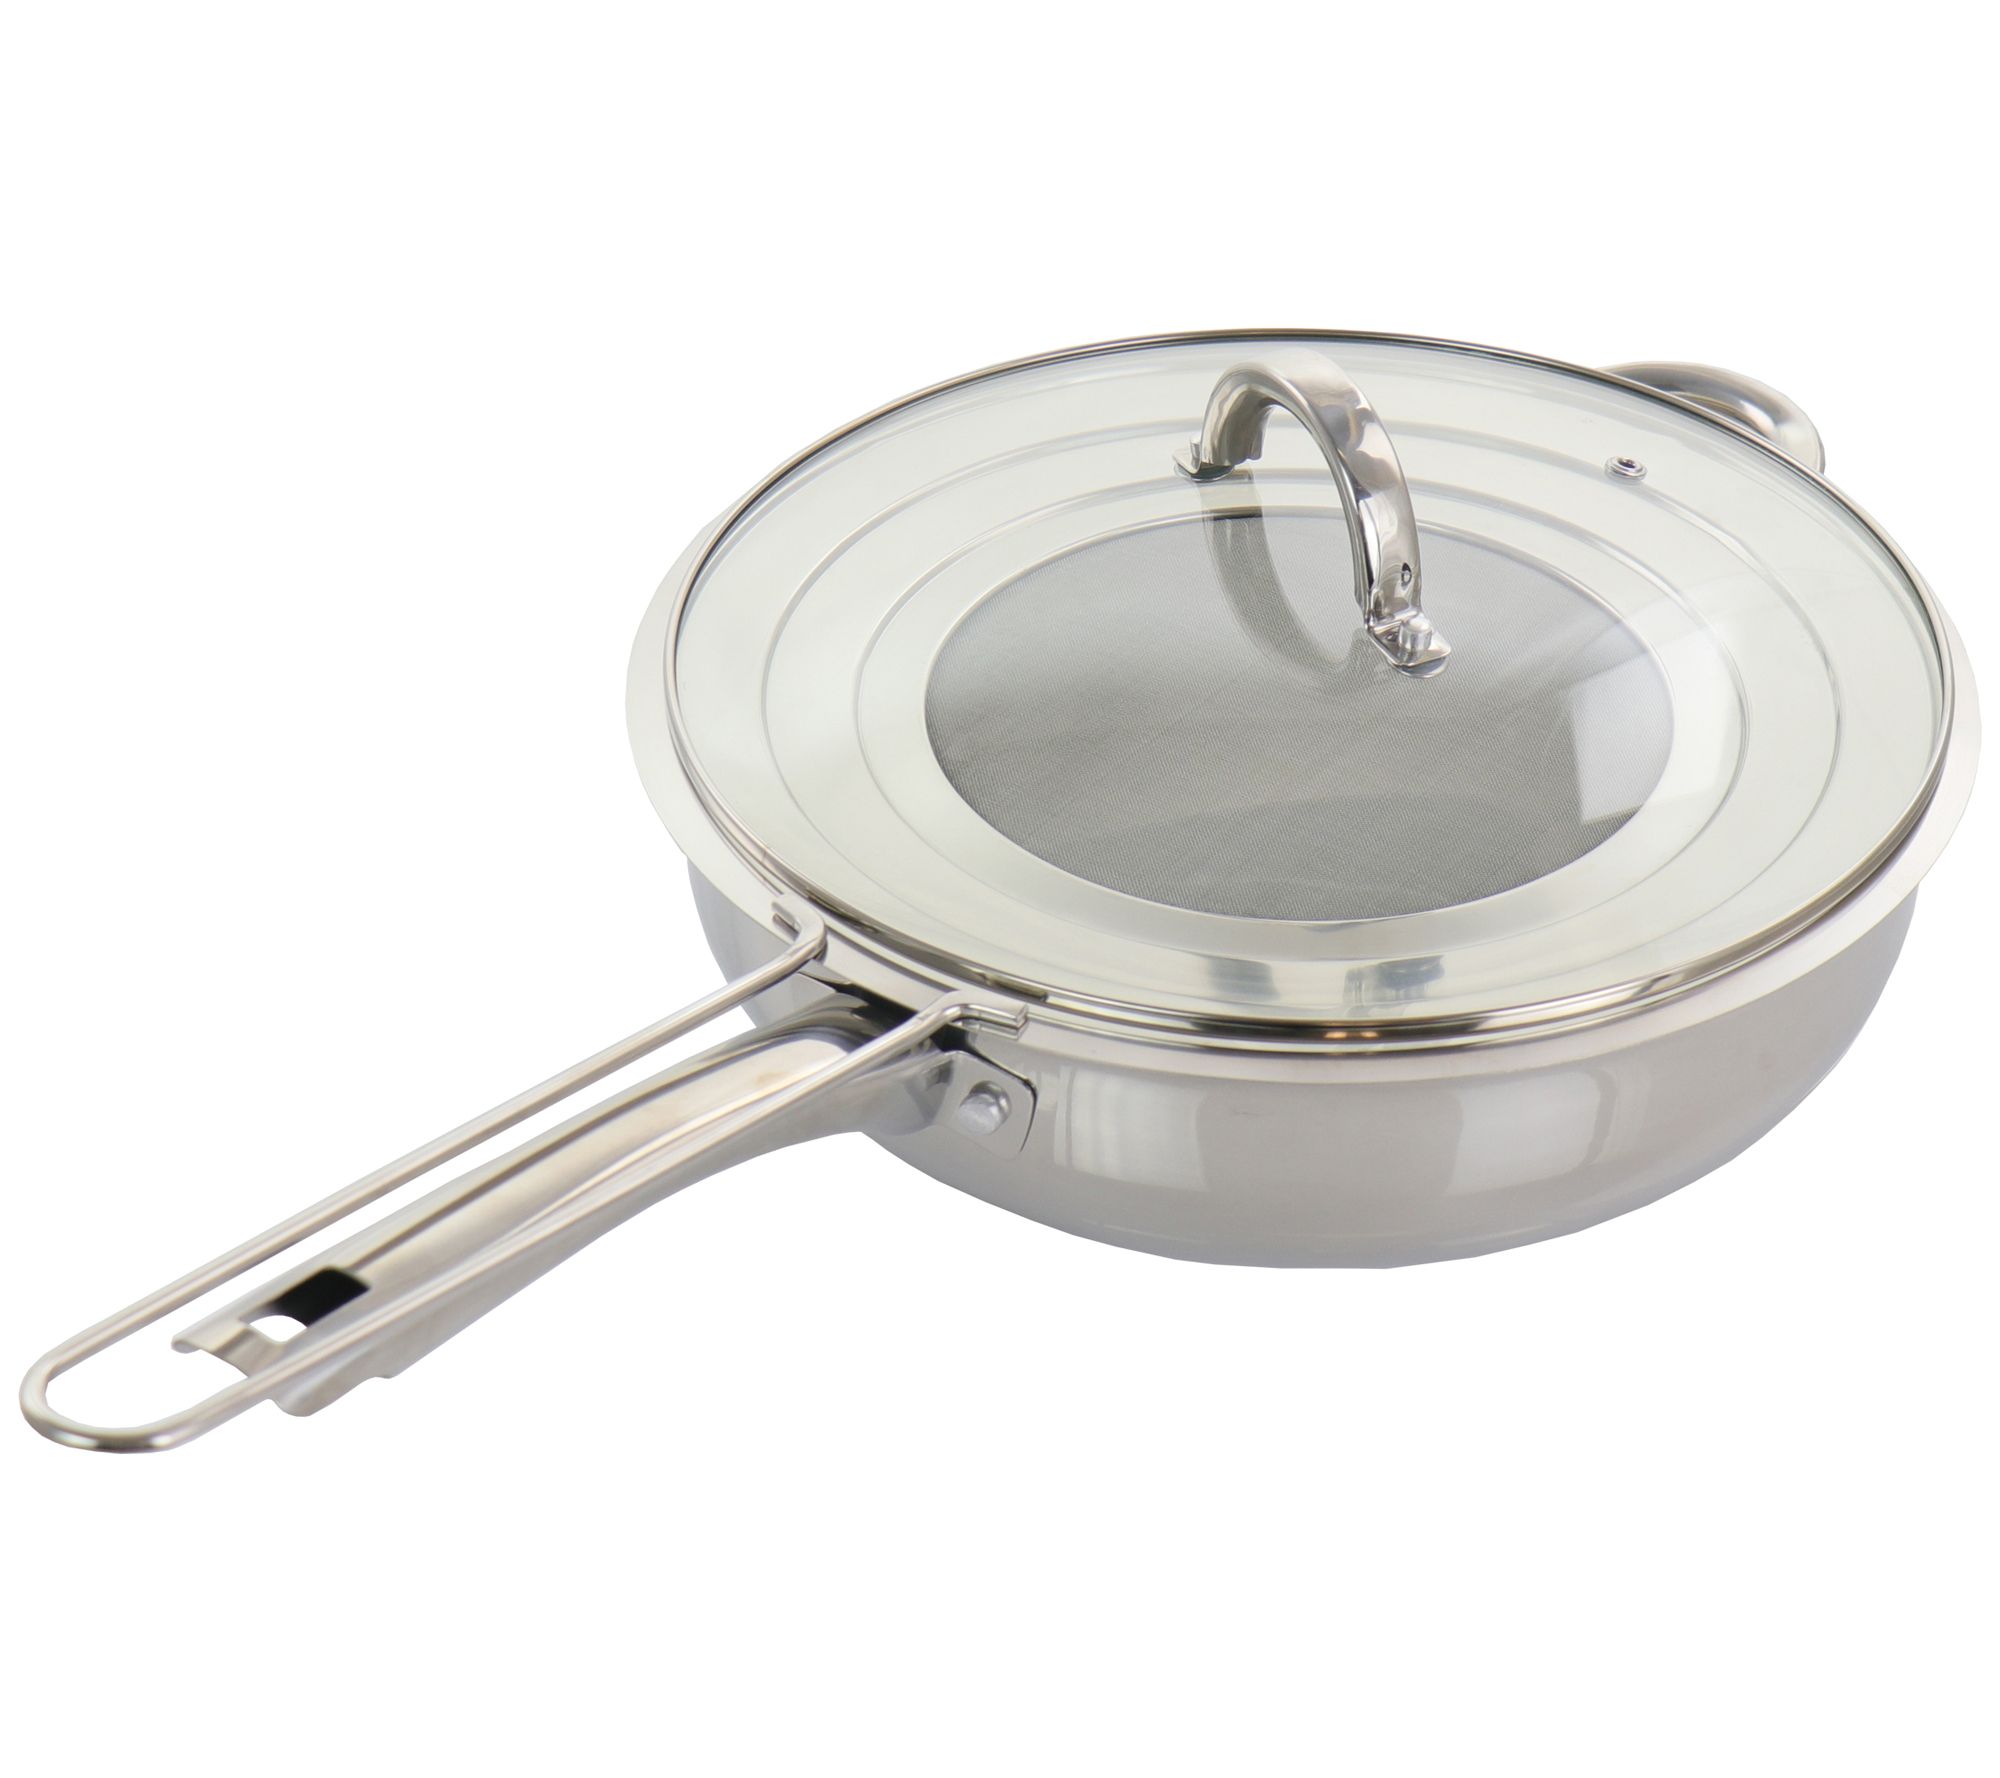 Voyage Tri-Ply Chef's Pan with Insulated Lid